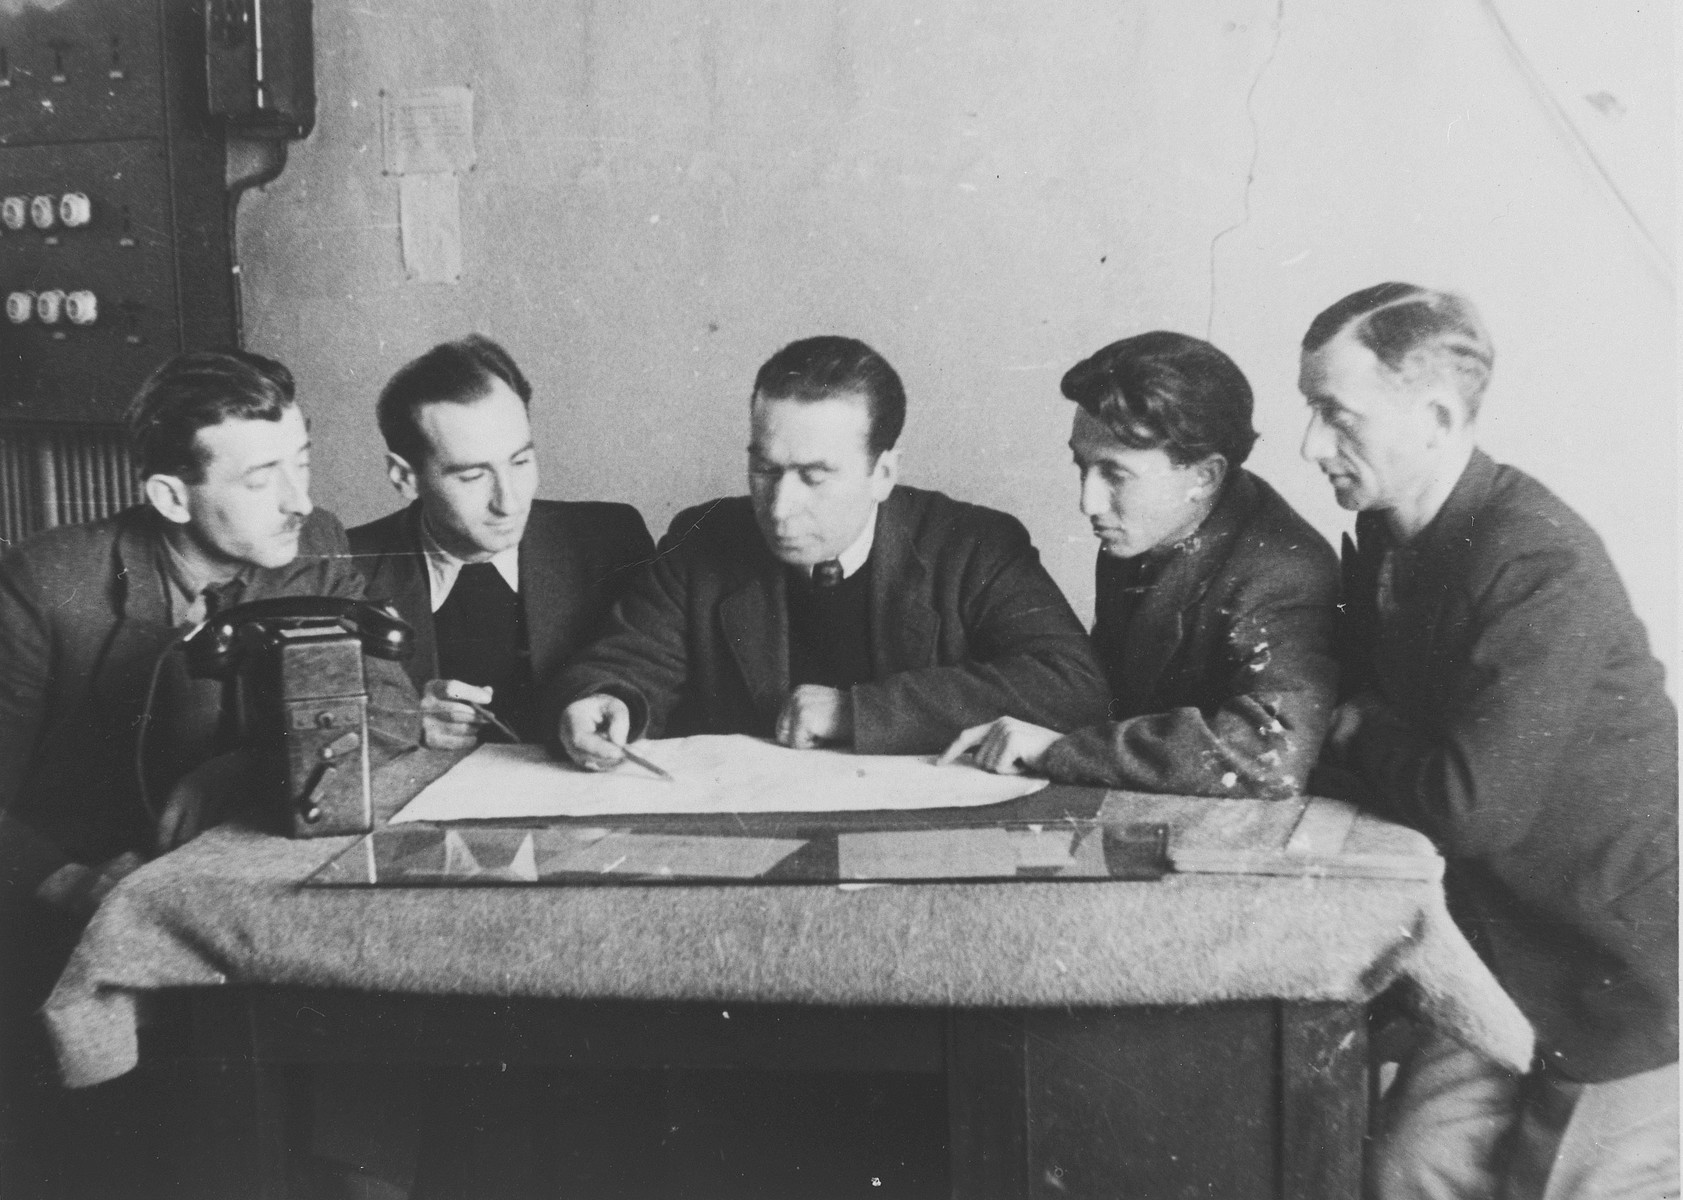 Edward Cittrons, director of ORT in Neu-Ulm, and four other men examine some plans on a table in his office.